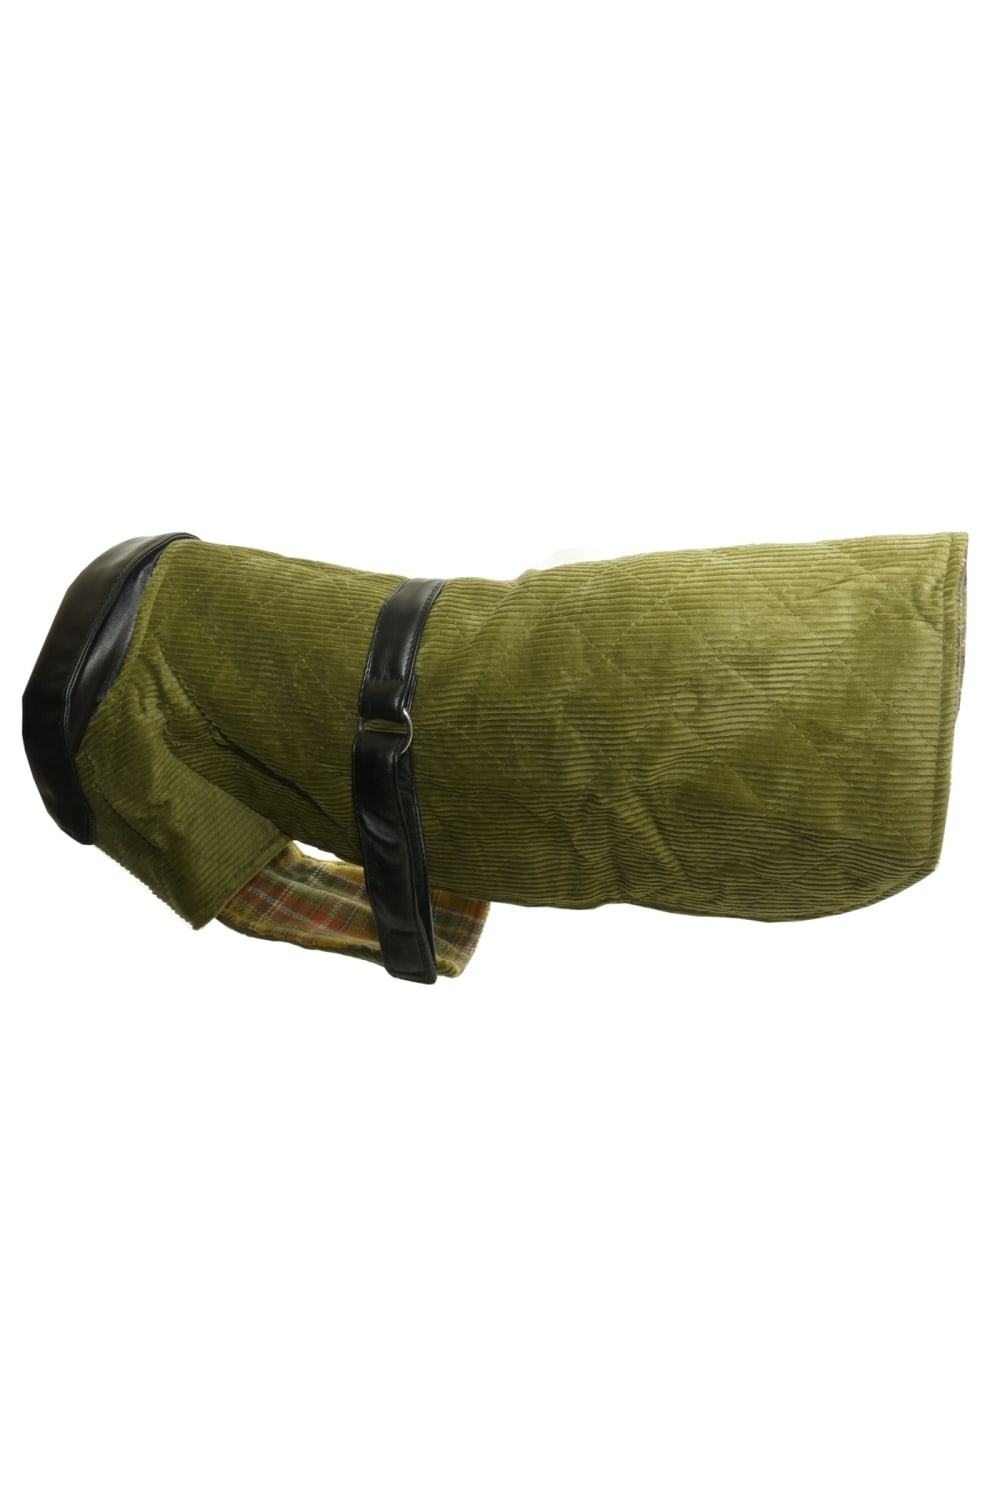 Vital Pet Products Corduroy And Leather Dog Coat (Green) (18in) (18in)